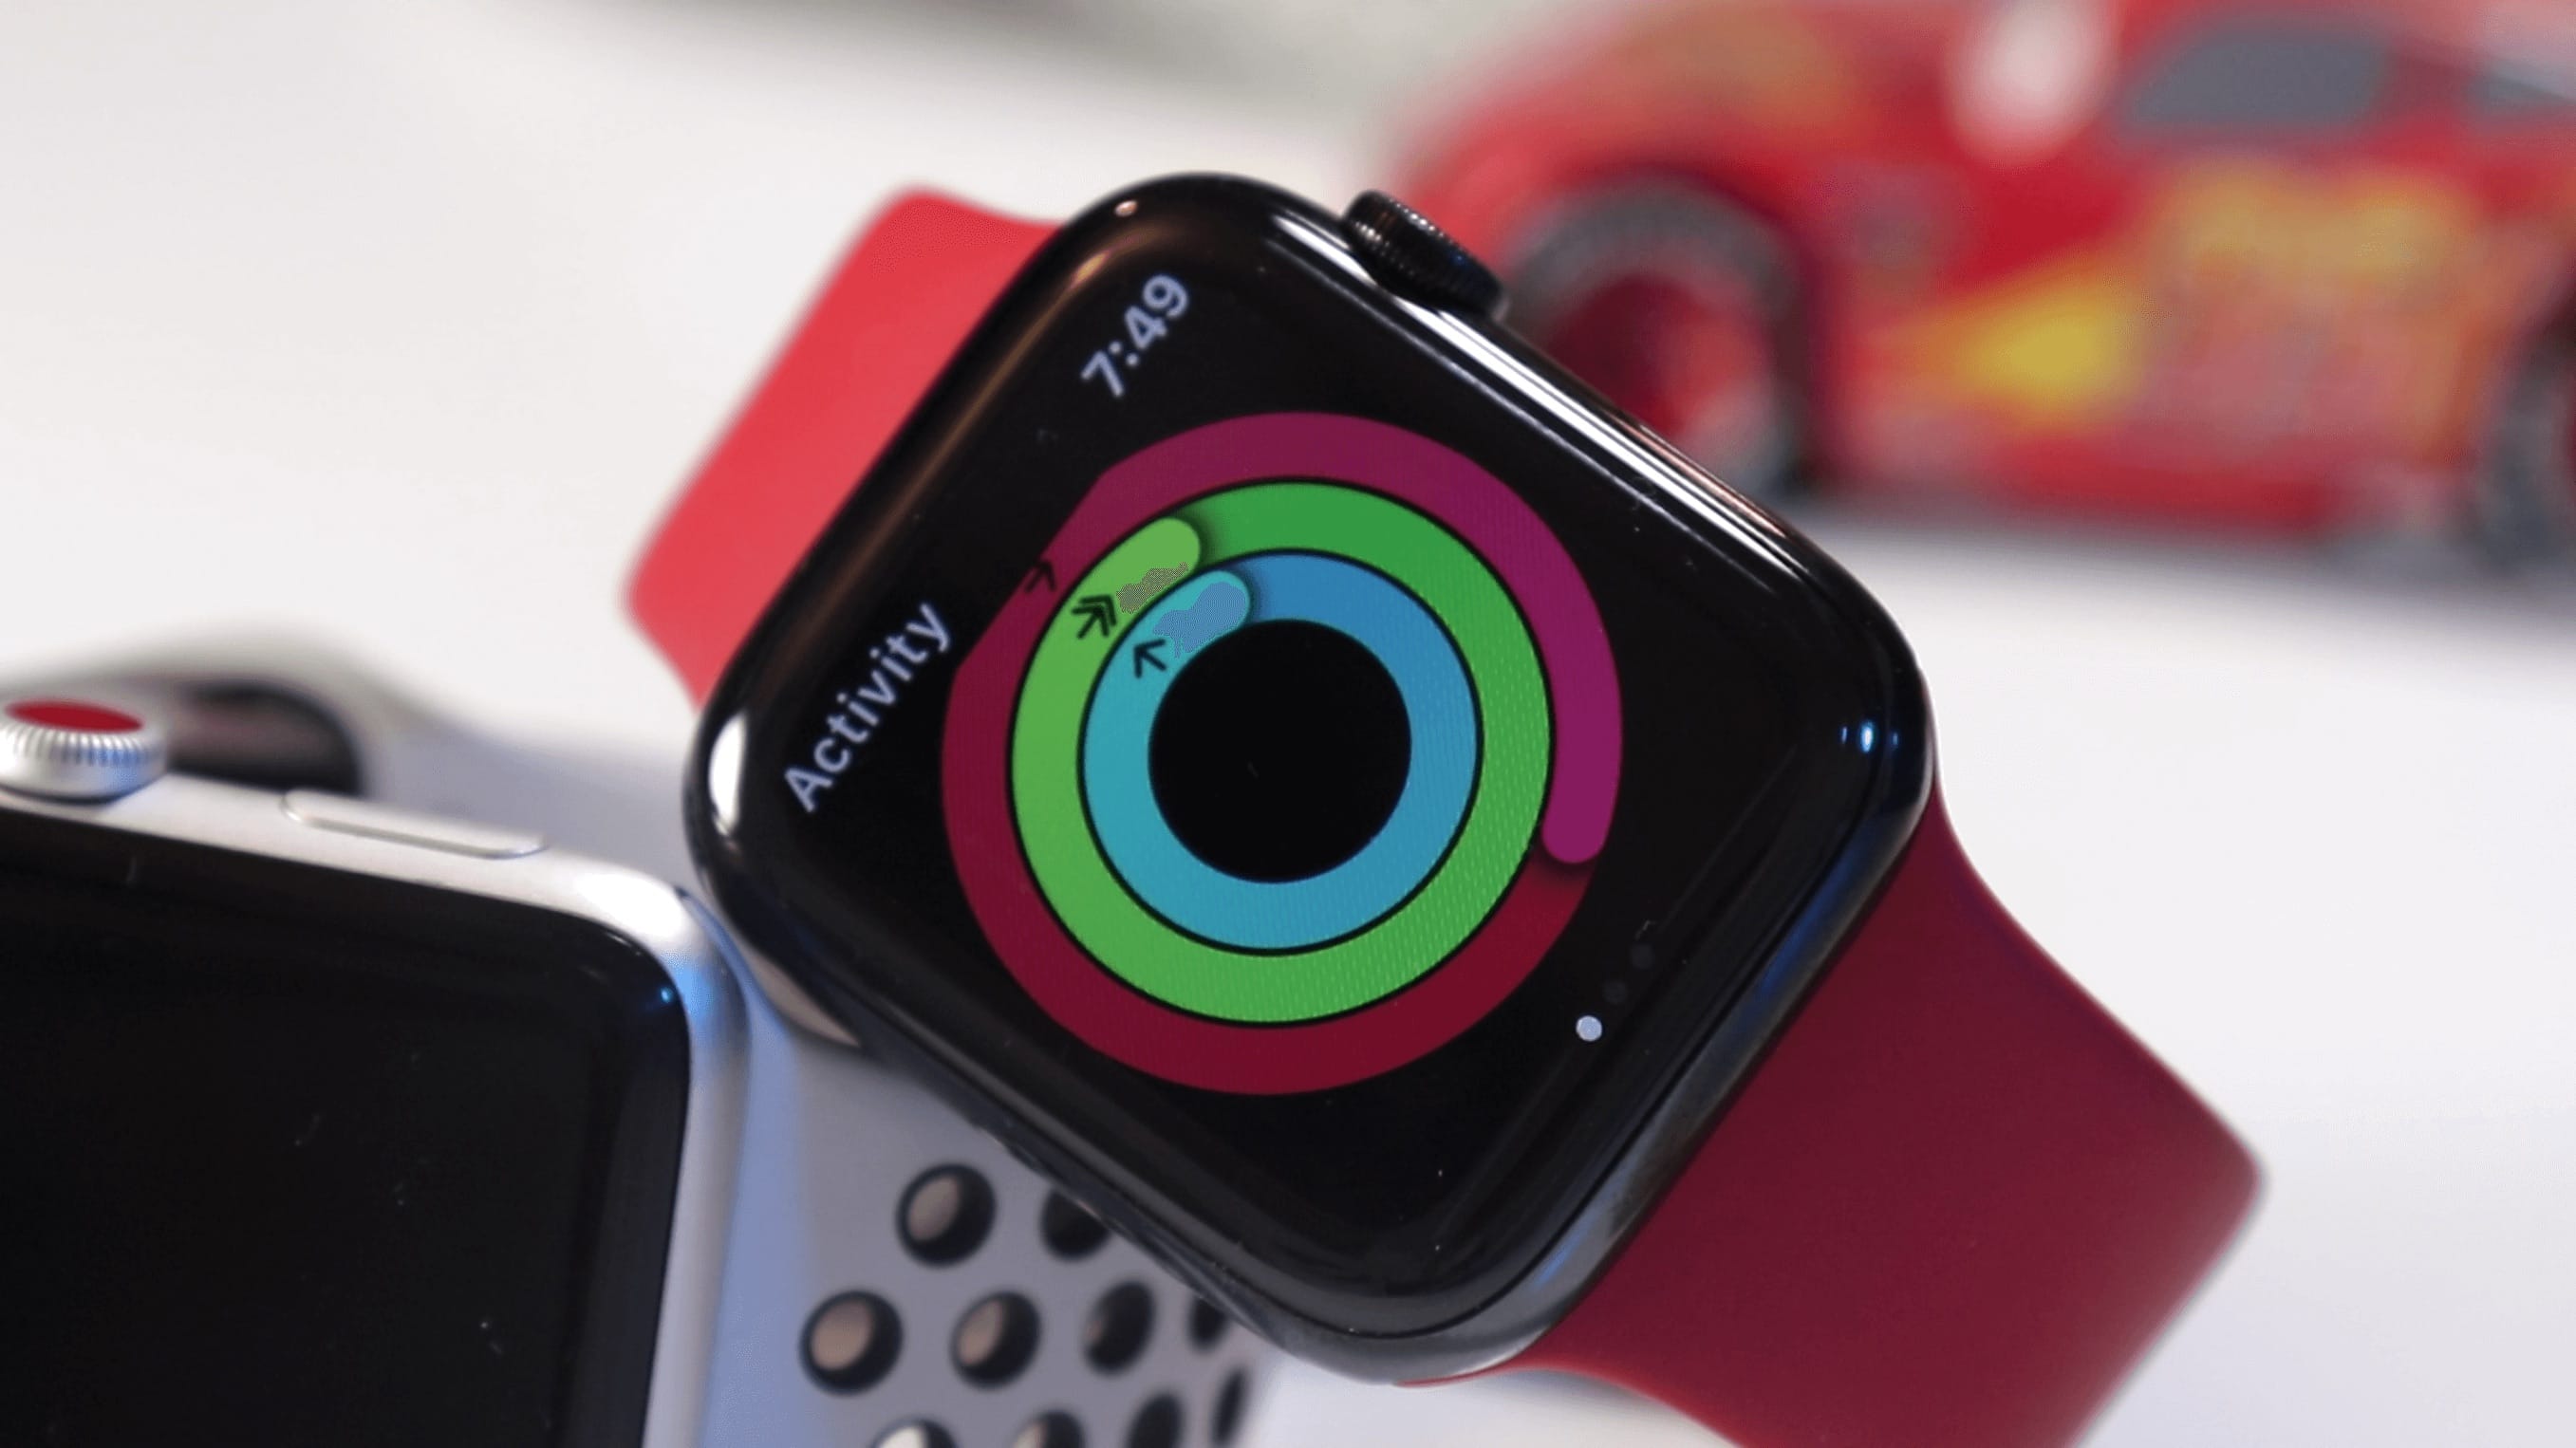 Next Apple Watch Activity challenge will take place on Veterans Day